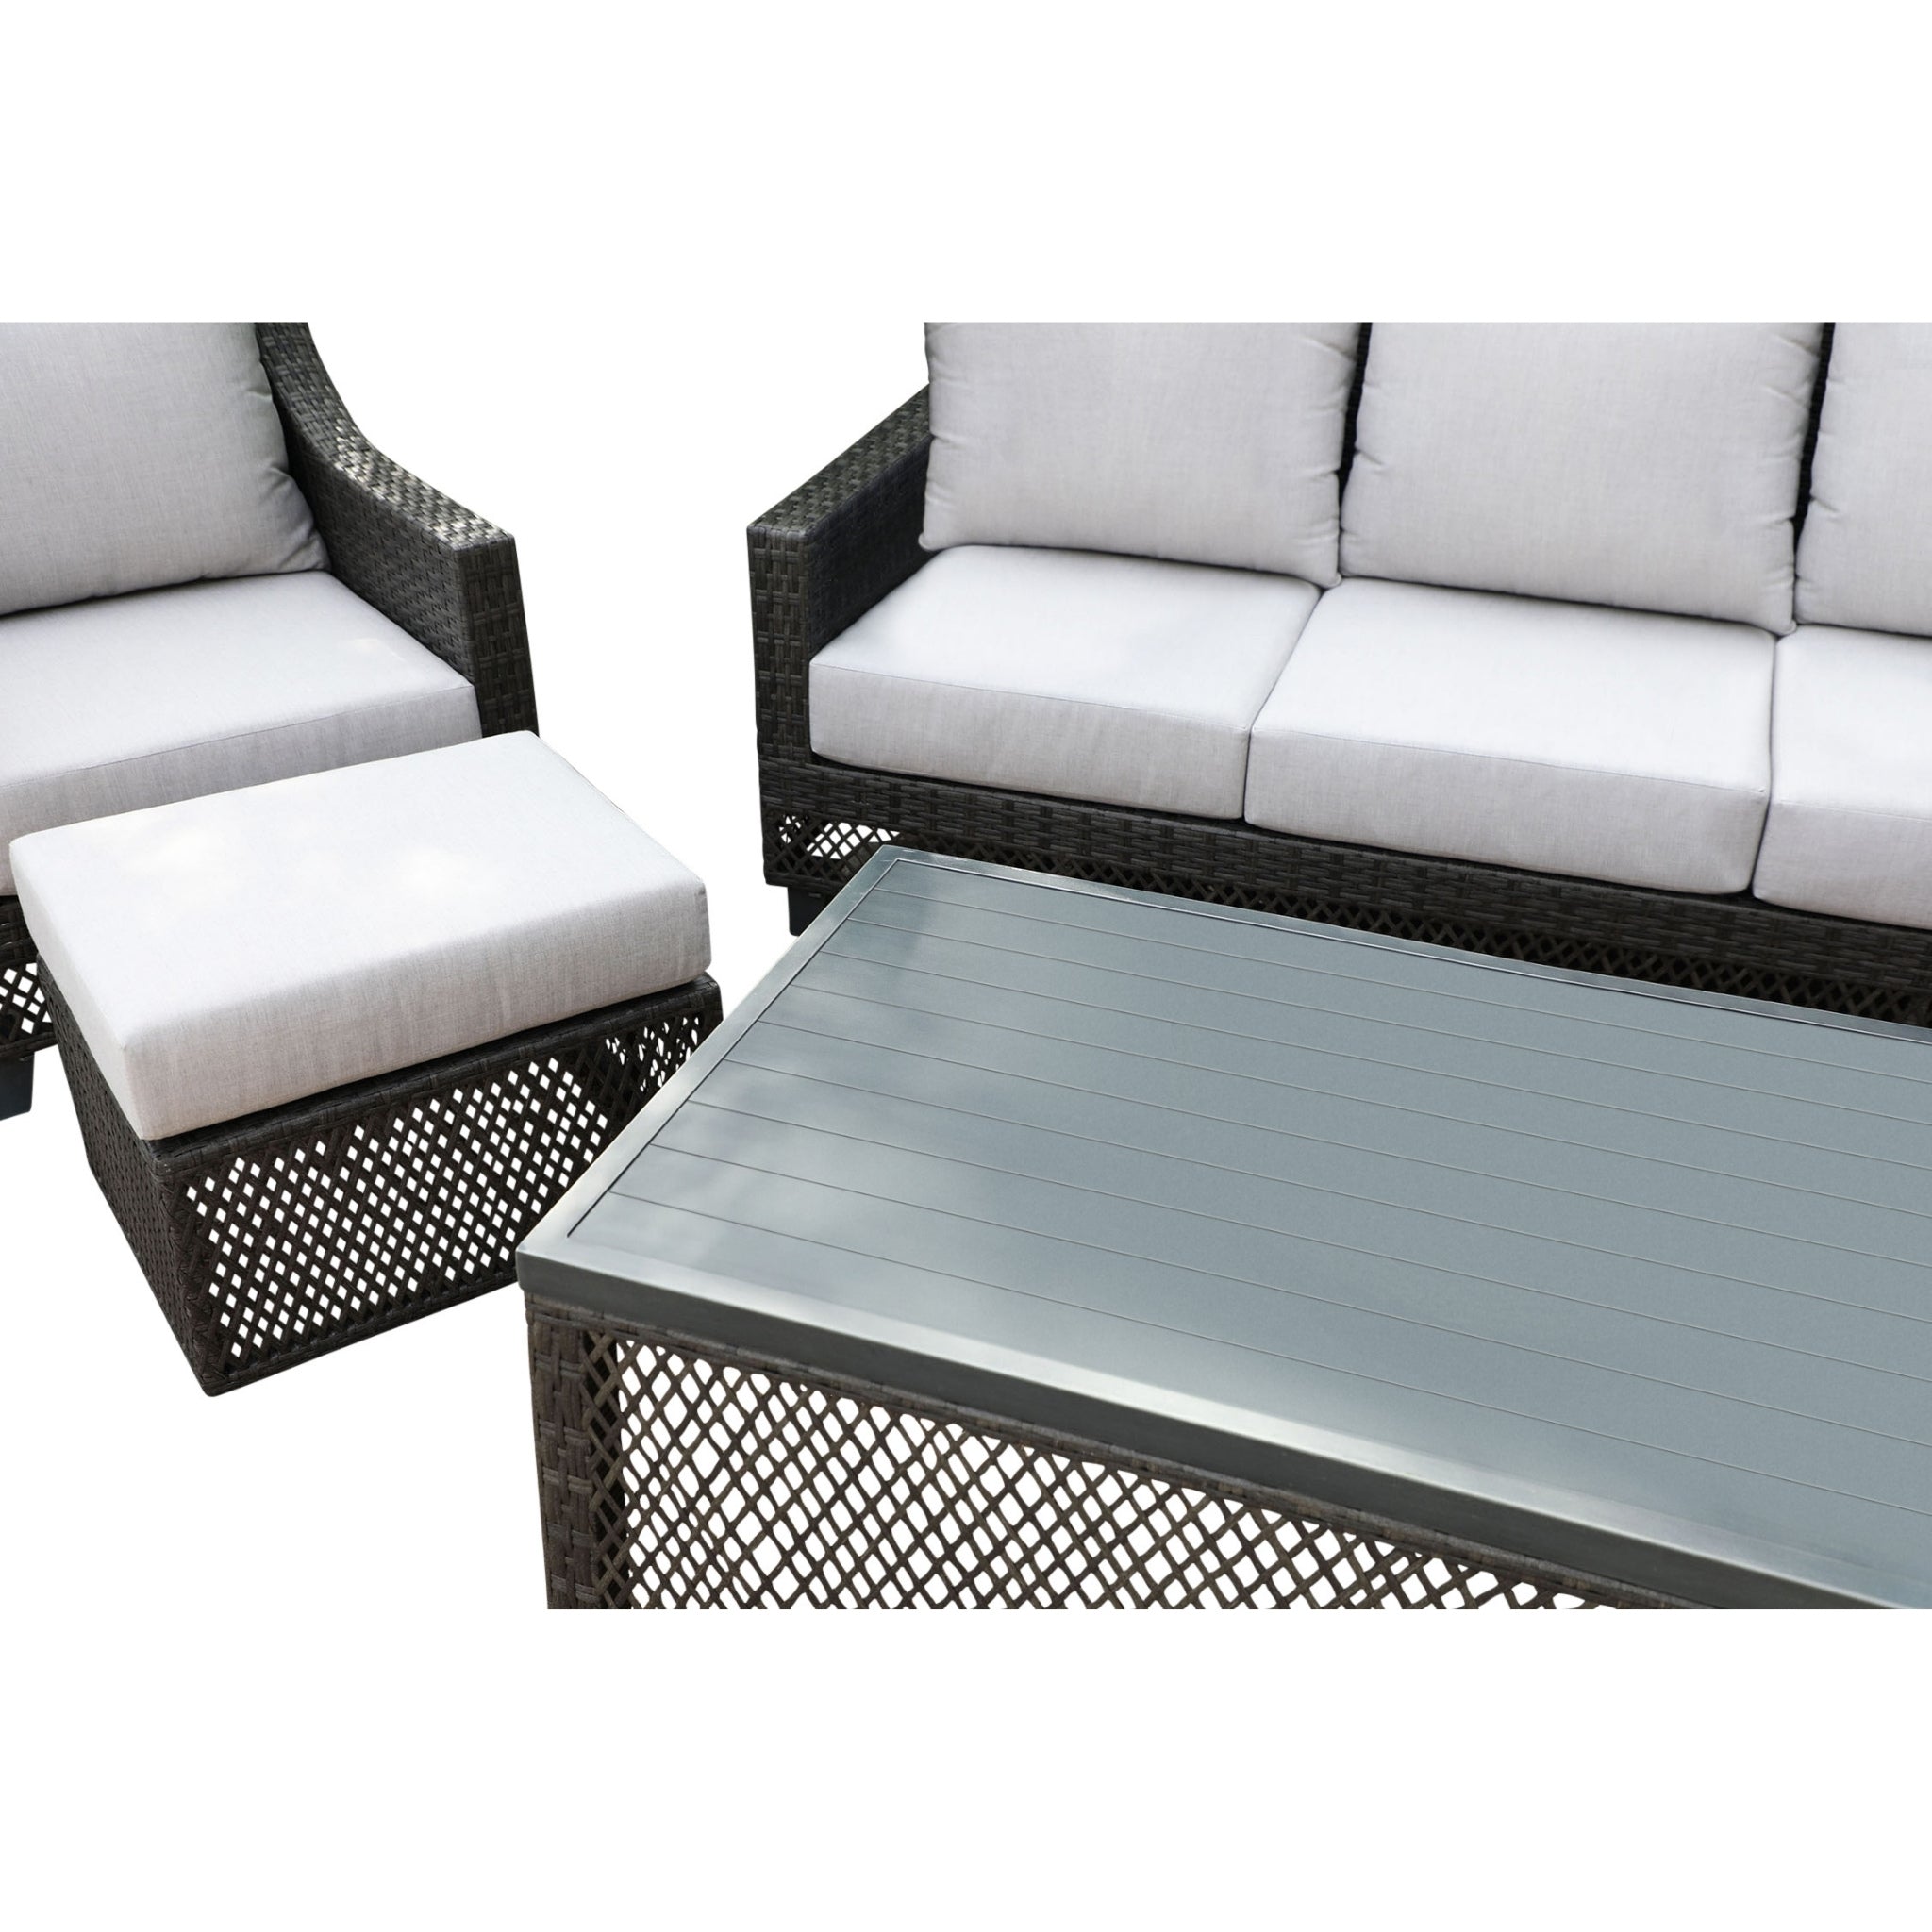 Burford 6pc Outdoor Seating Sectional